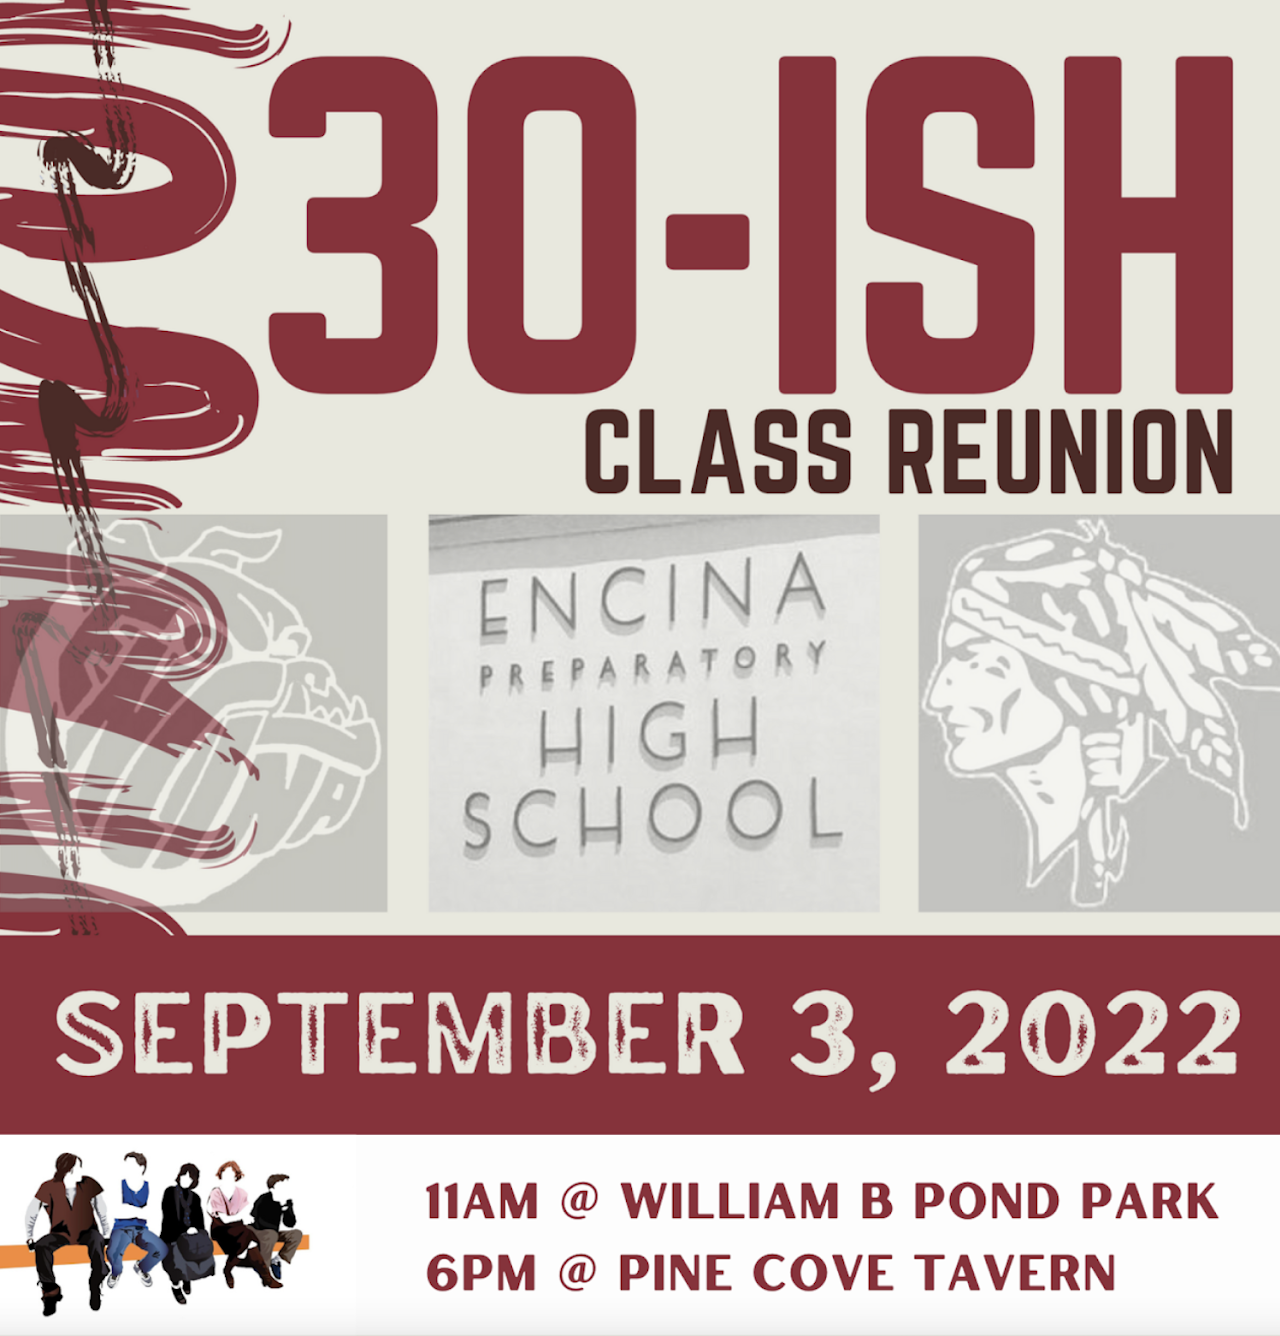 Hollywood High School Class of 1968 50-Year Reunion! - Reunion Committee